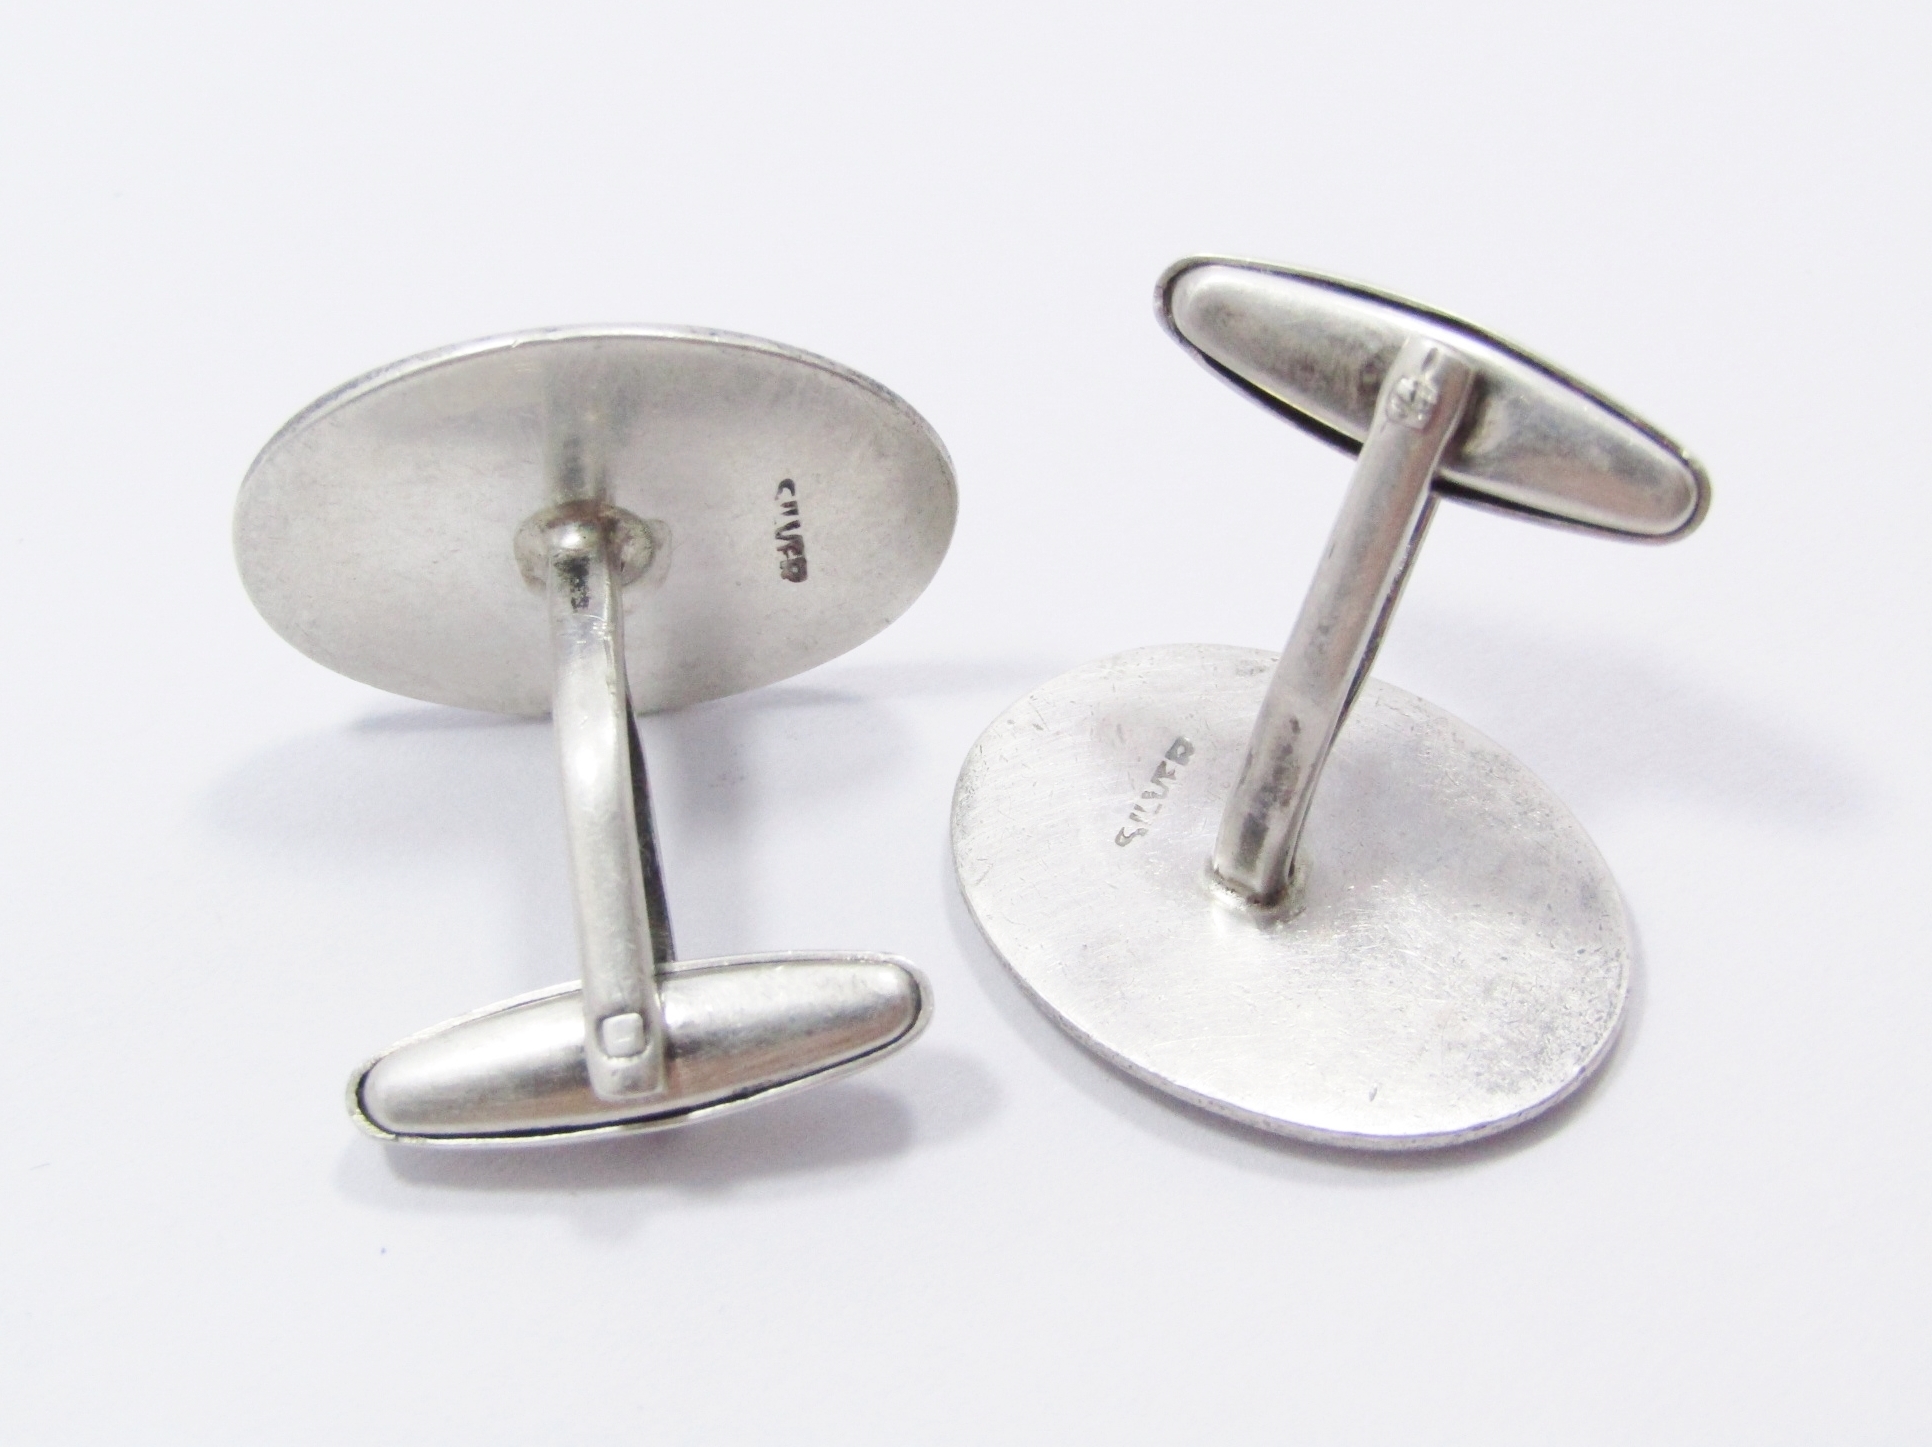 A Beautiful Pair of Vintage Cuff links With Roman Helmets in Sterling Silver.